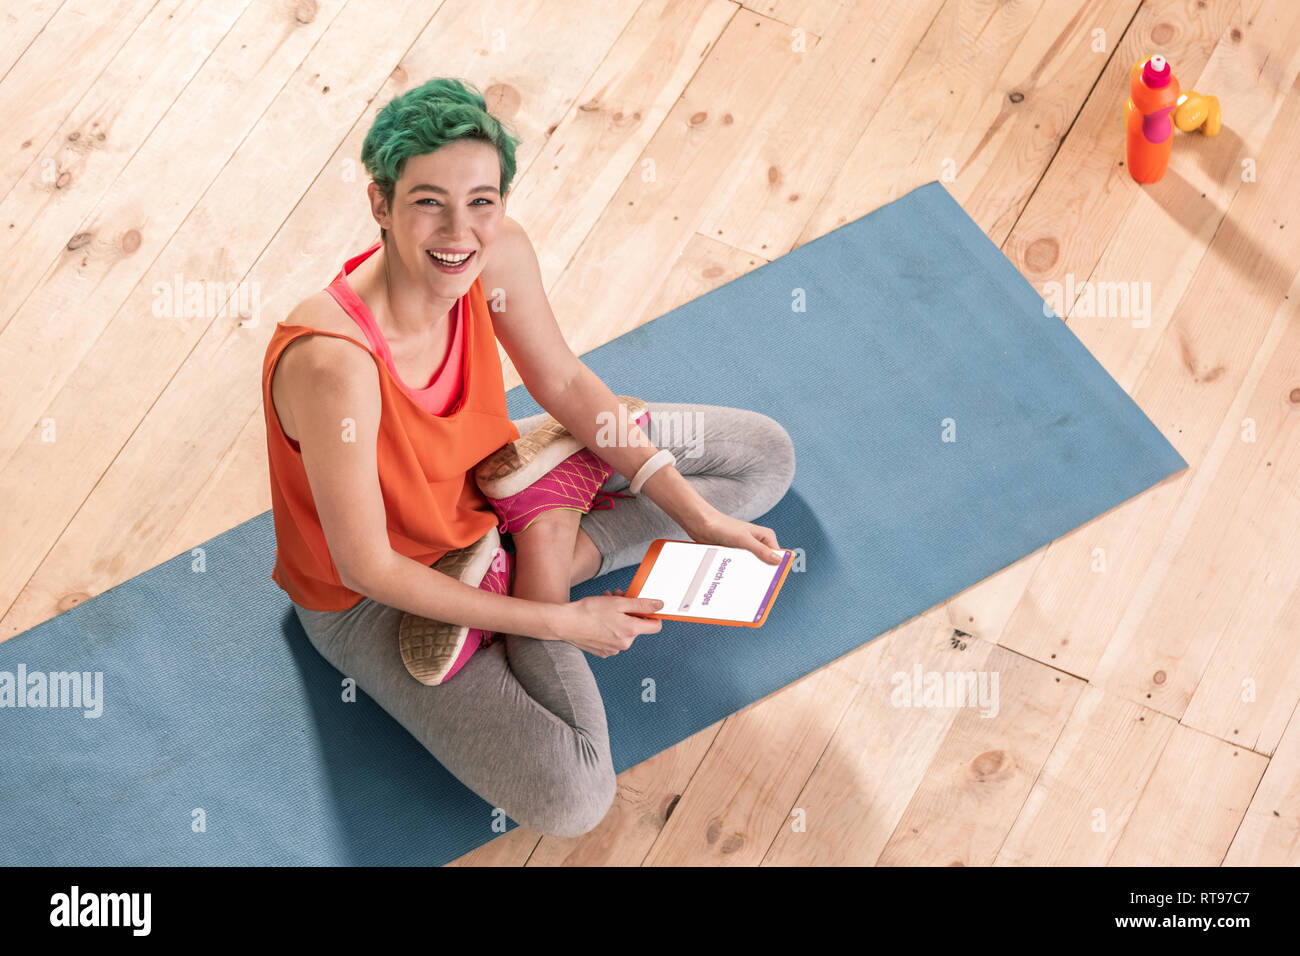 Beaming freelancer sitting with legs crossed on blue sport mat Stock Photo